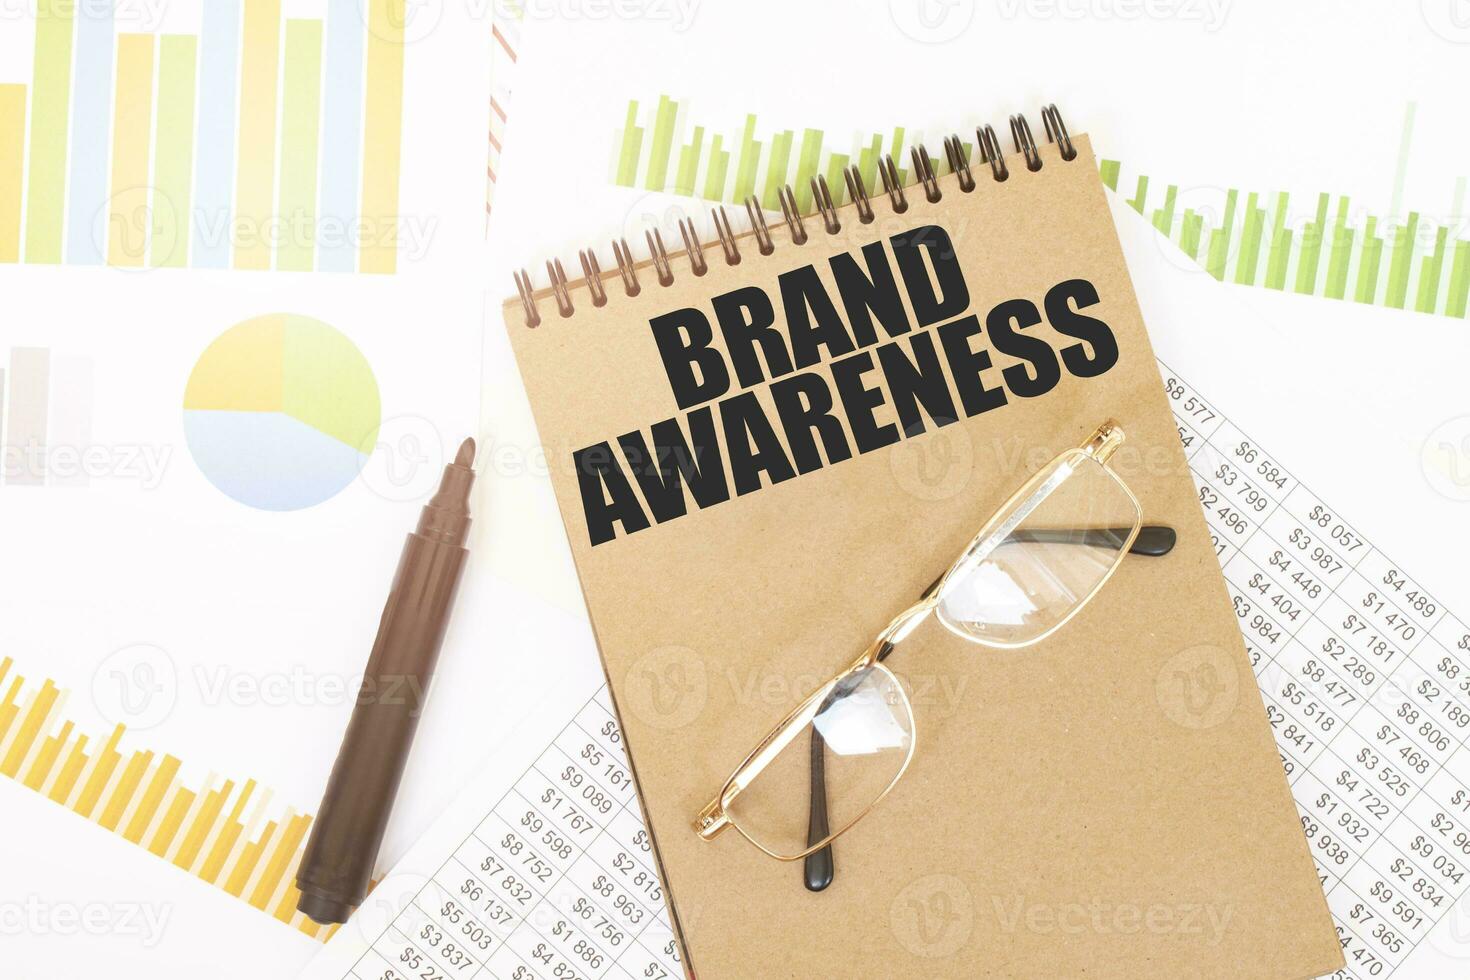 In a craft colour notebook is a BRAND AWARENESS inscription, next to pencils, glasses, graphs and diagrams. photo